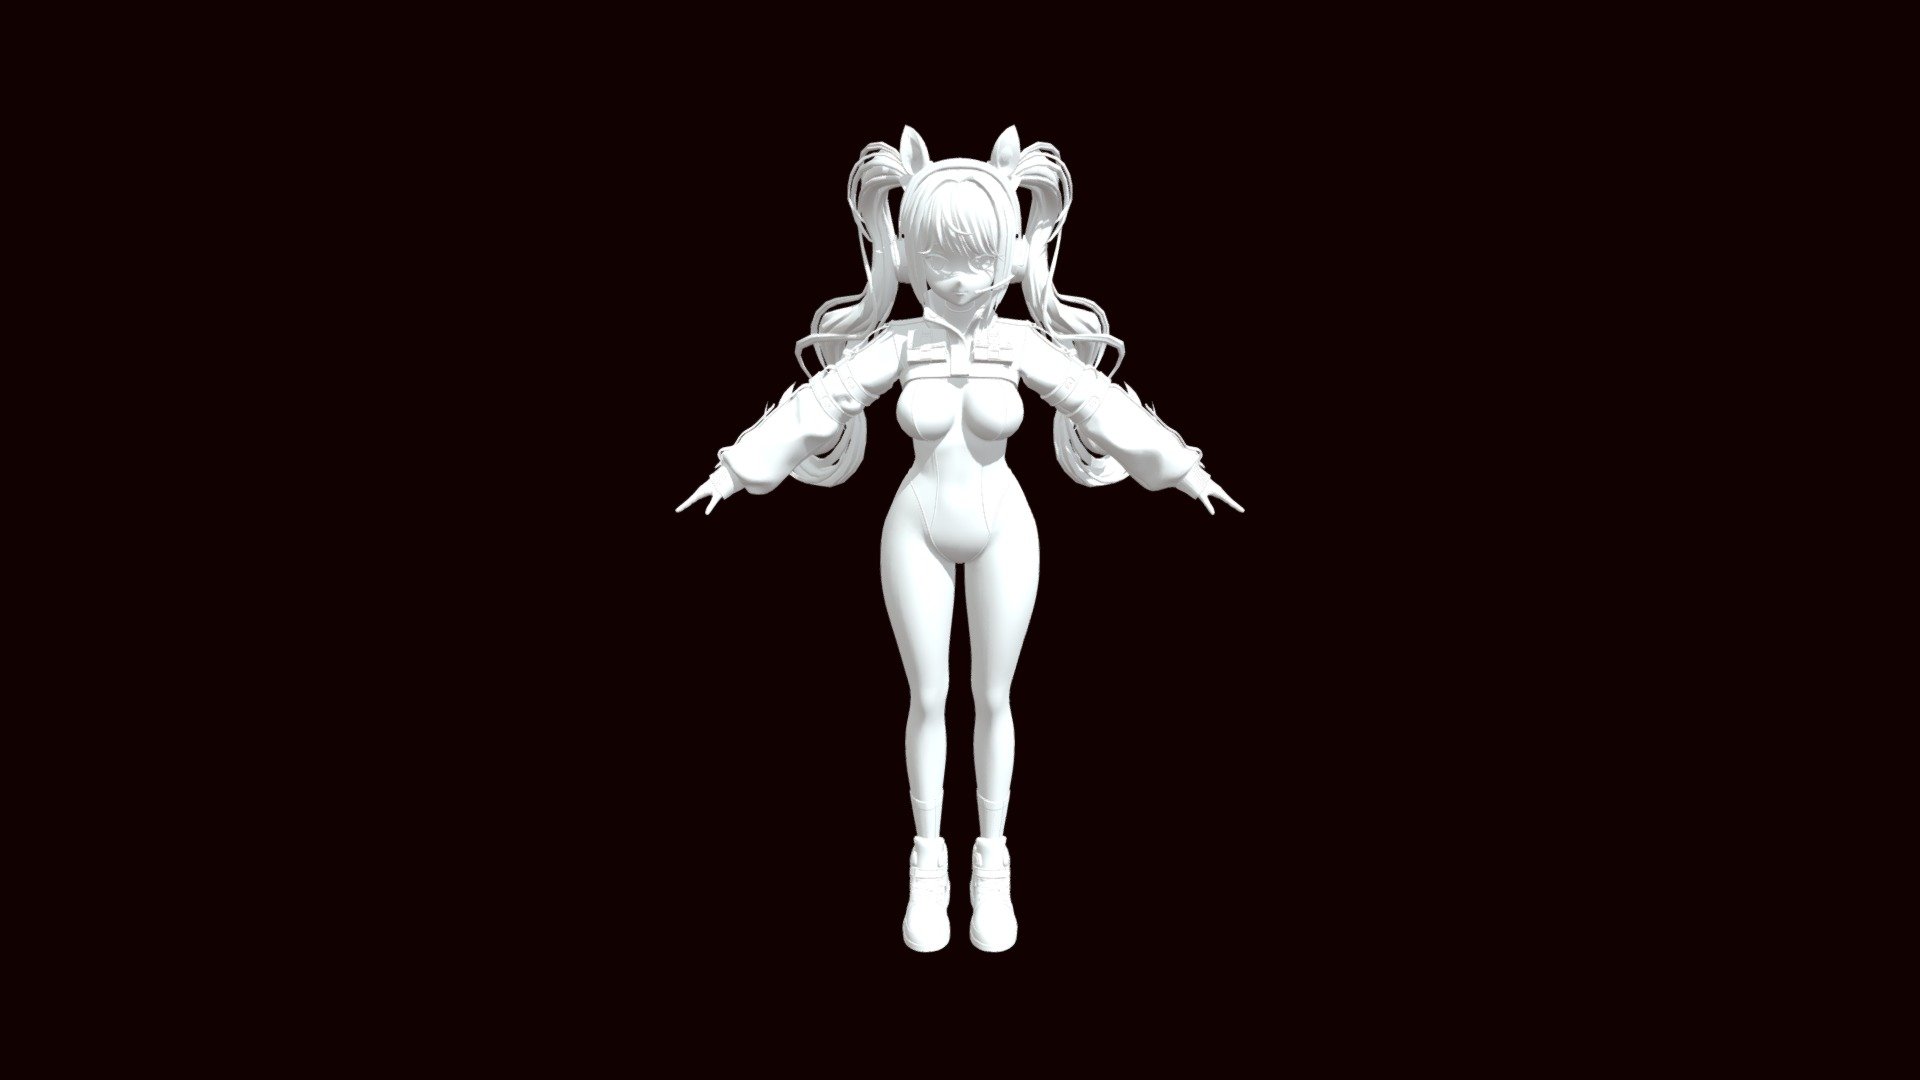 I went through conversion hell to get this uploaded,  i hope you enjoy this 3d model of Alice from NIKKE: Goddess of Victory! now updated! the textures are in the zip file tho. 3d model